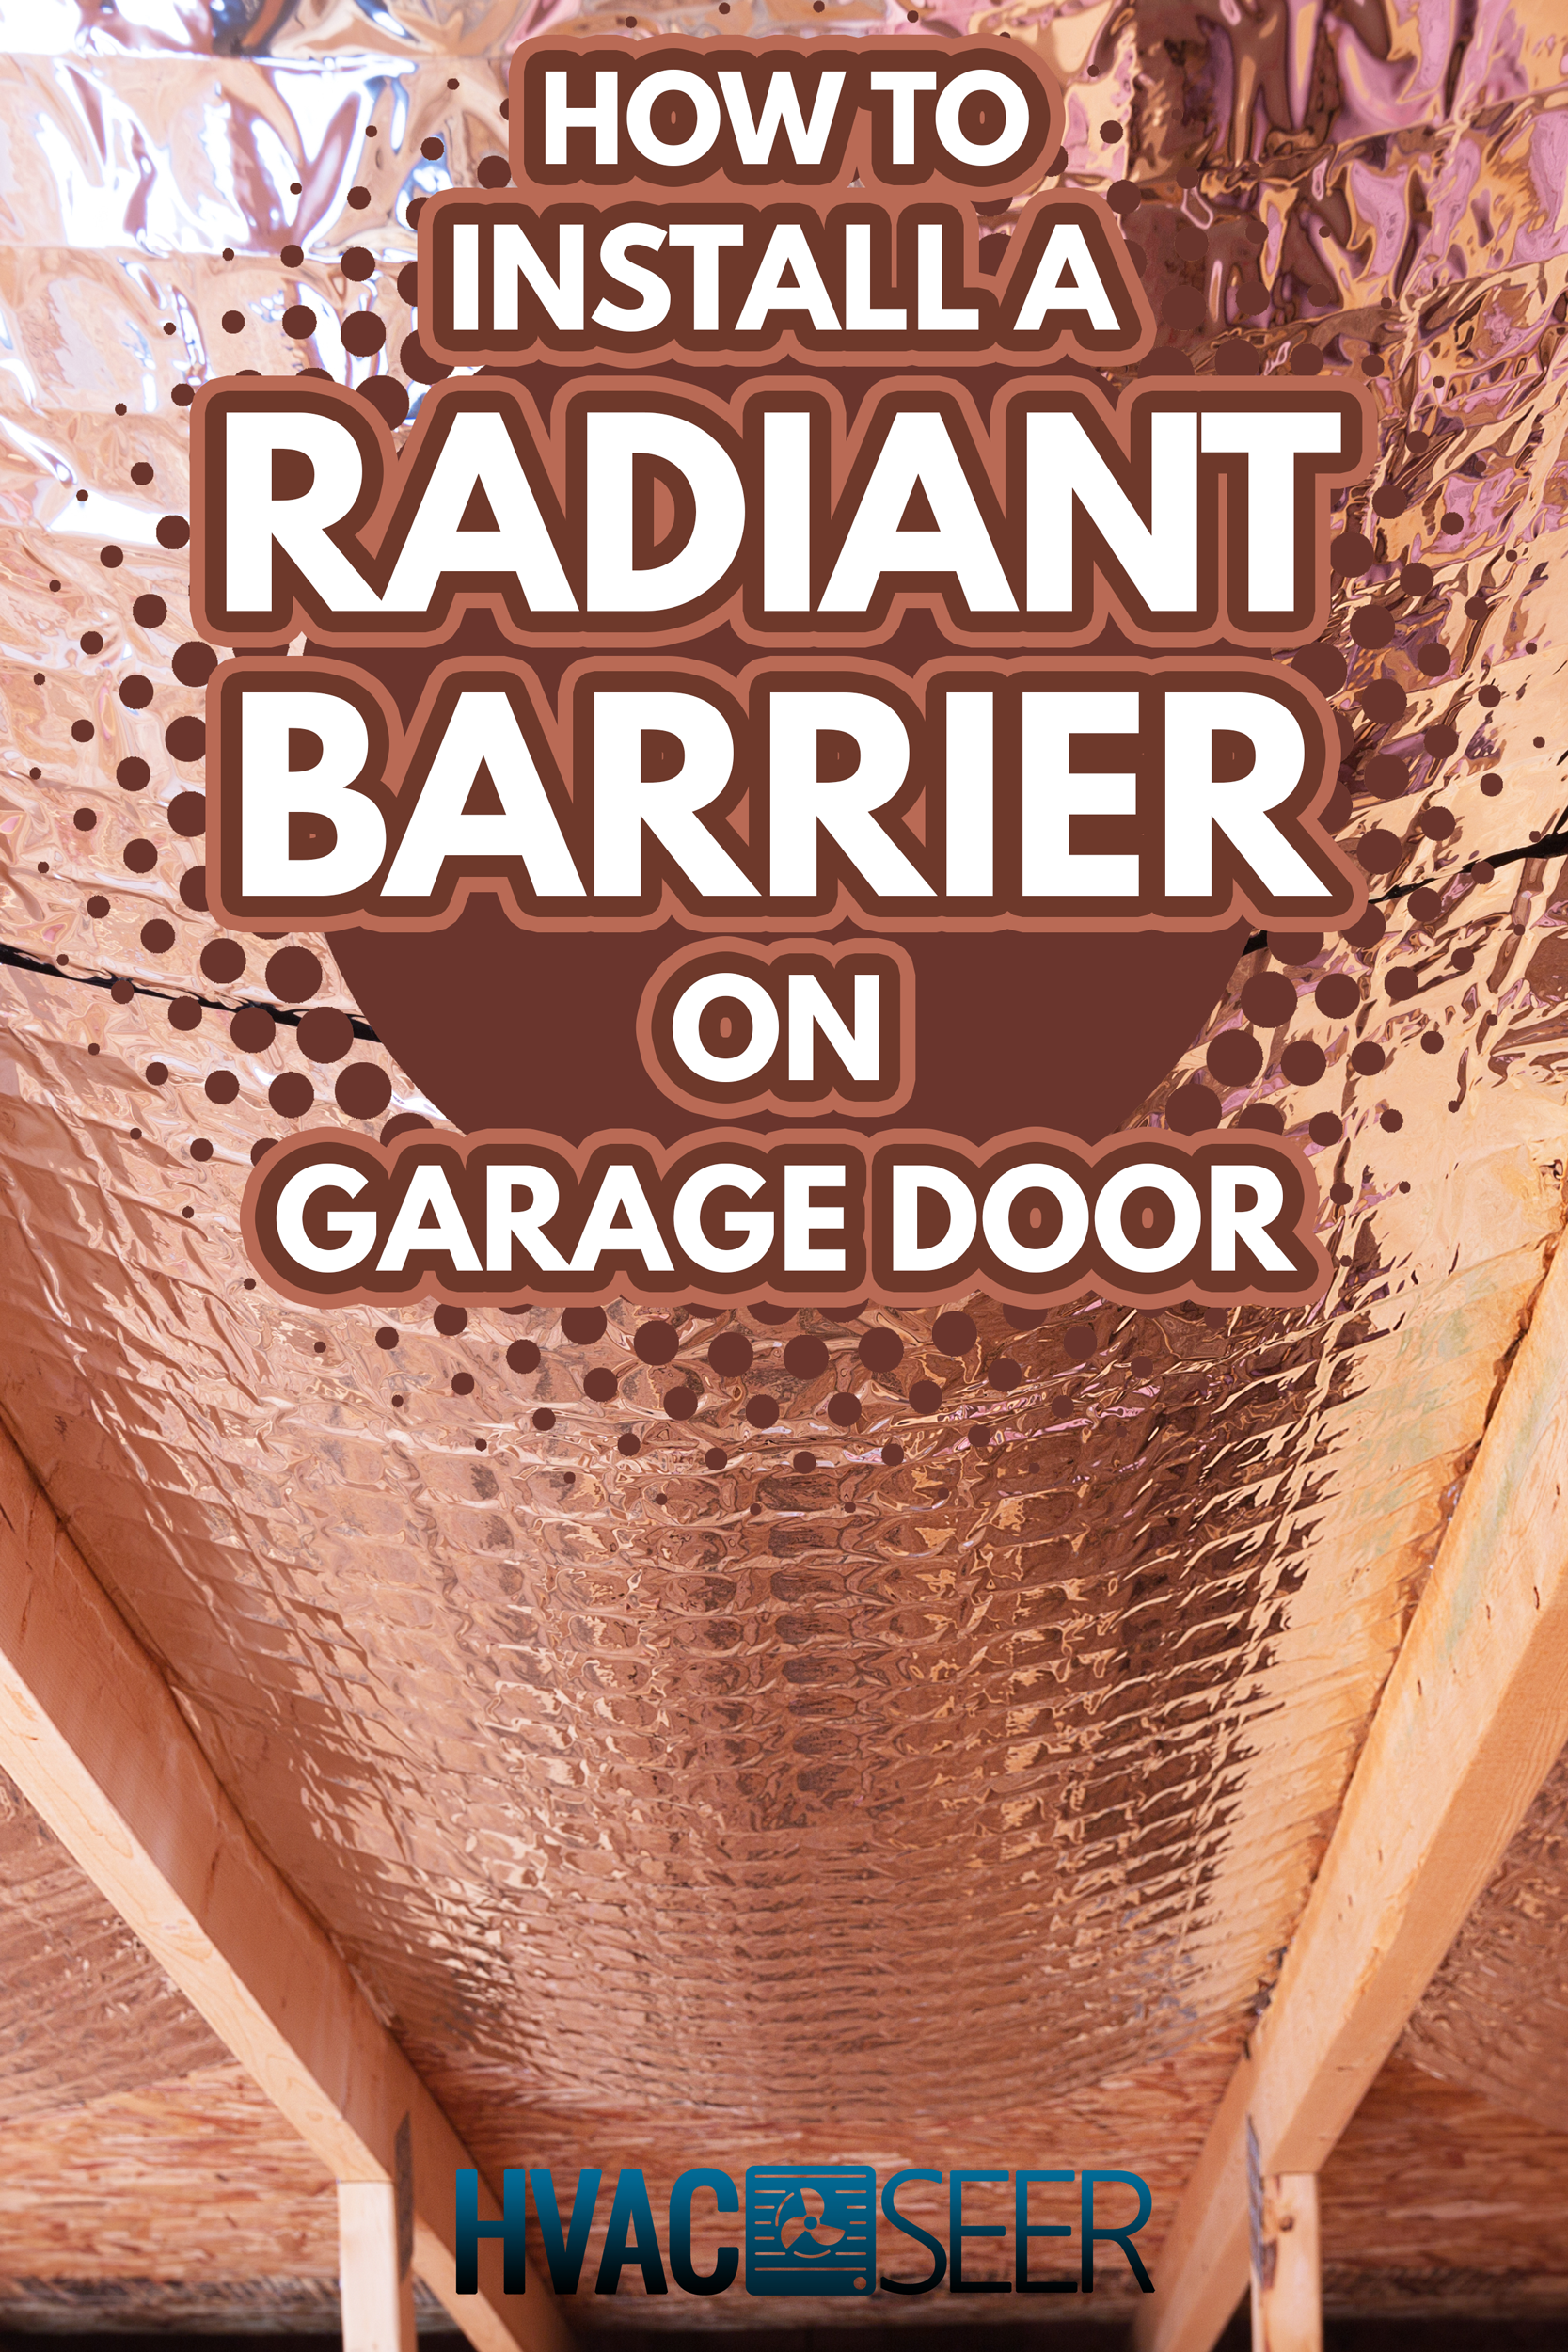 Insulating of attic with fiberglass cold barrier and reflective heat barrier used as baffle between the attic joists to increase the ventilation to reduce humidification - How To Install A Radiant Barrier On Garage Door